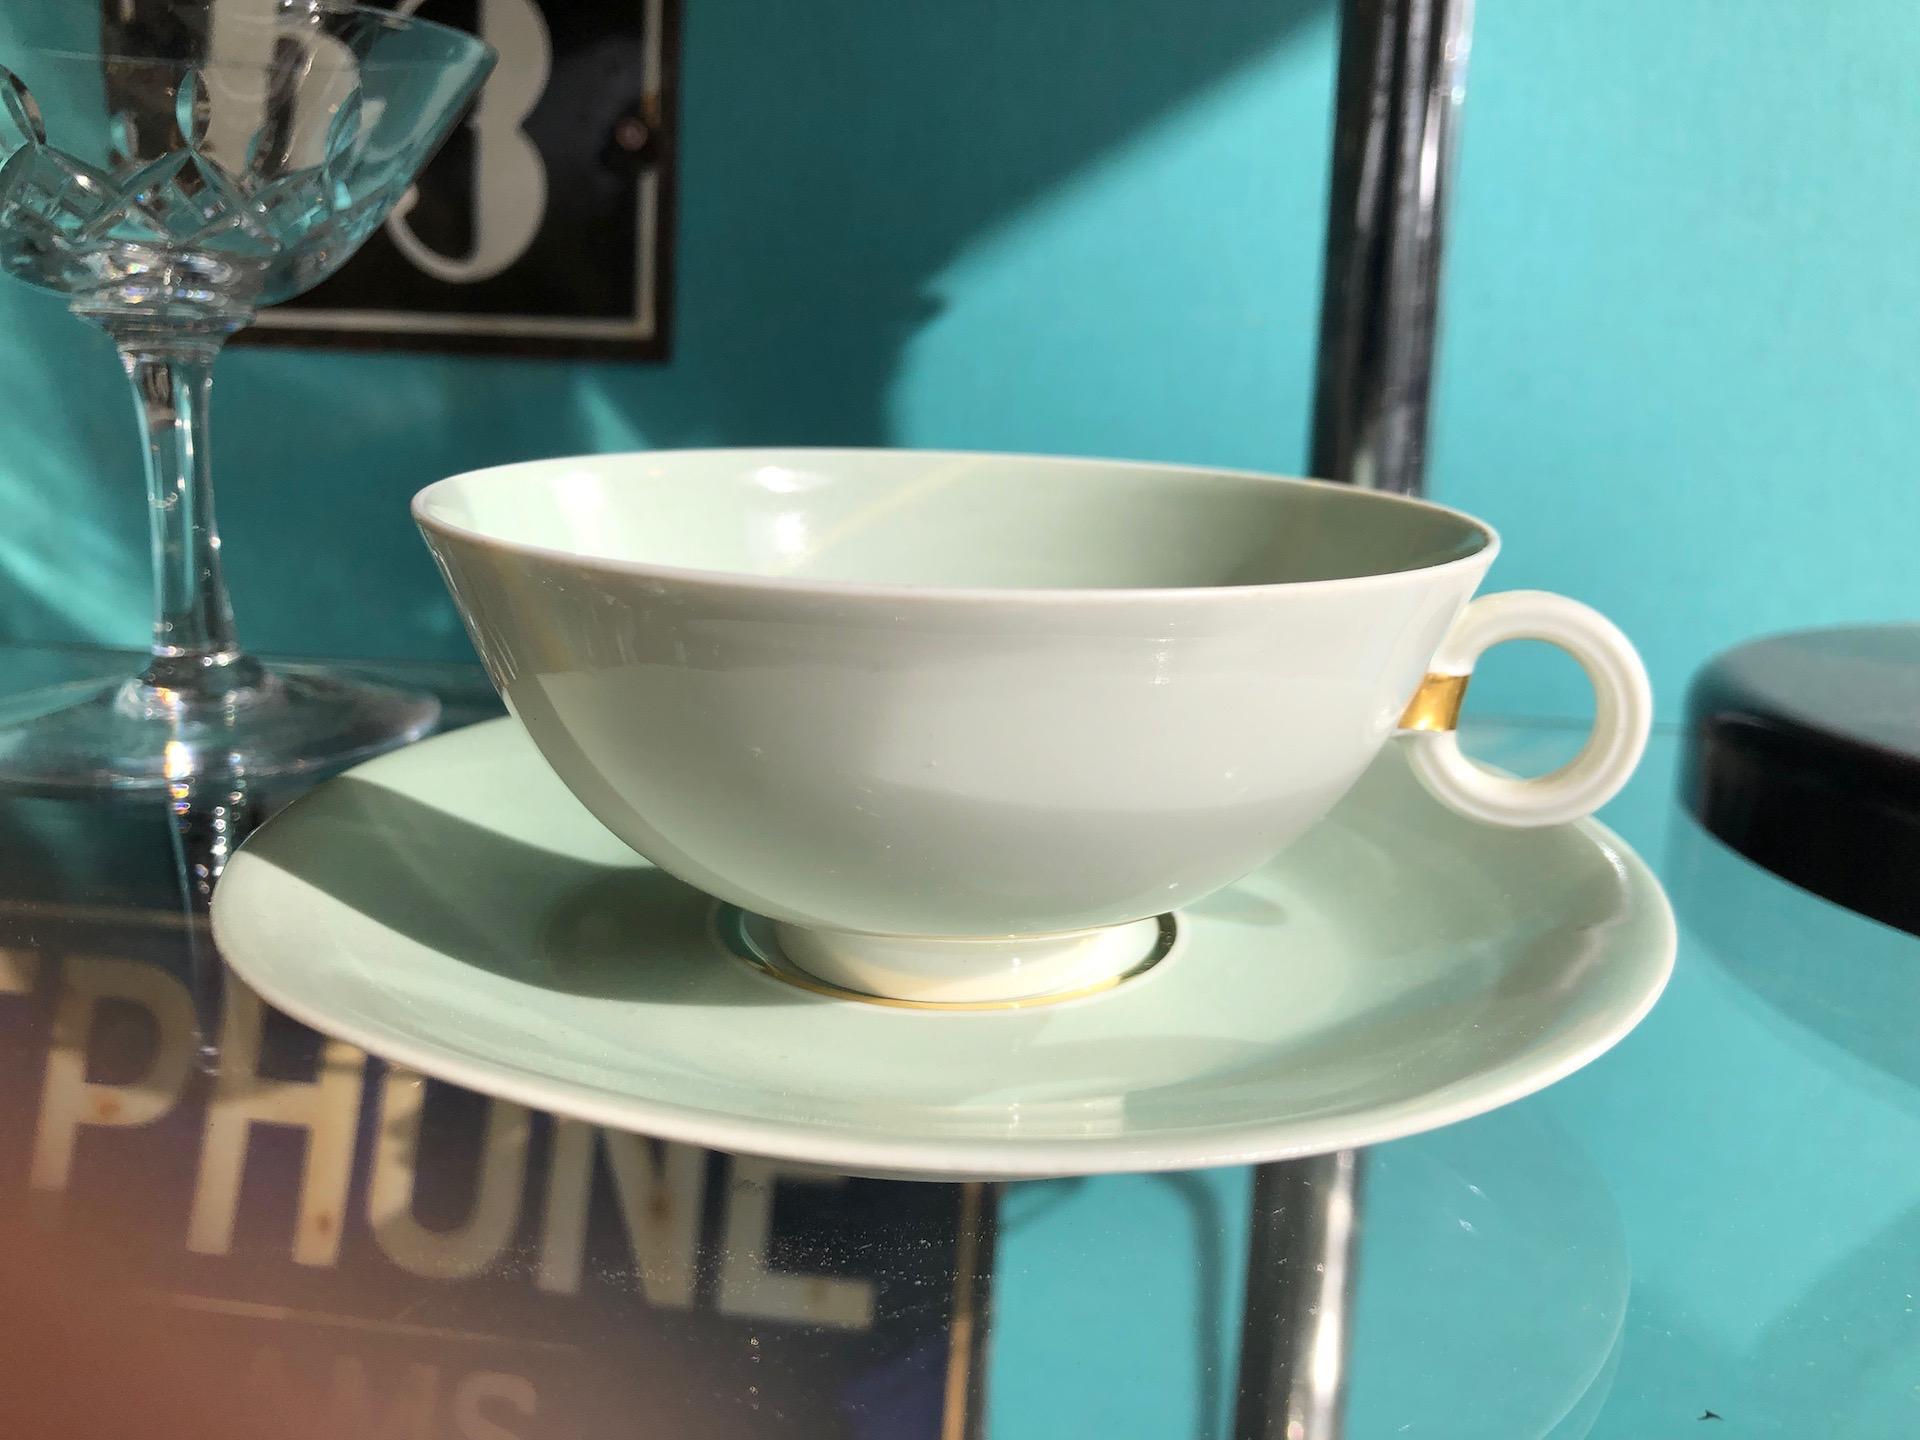 Made in very fine porcelain from Limoges, this complete set made by the famous French Manufacturer A. Vignaux and its model name is Ruhlmann and when we see why looking at the cup and saucer. All about it is delicate, its unique design, the finesse